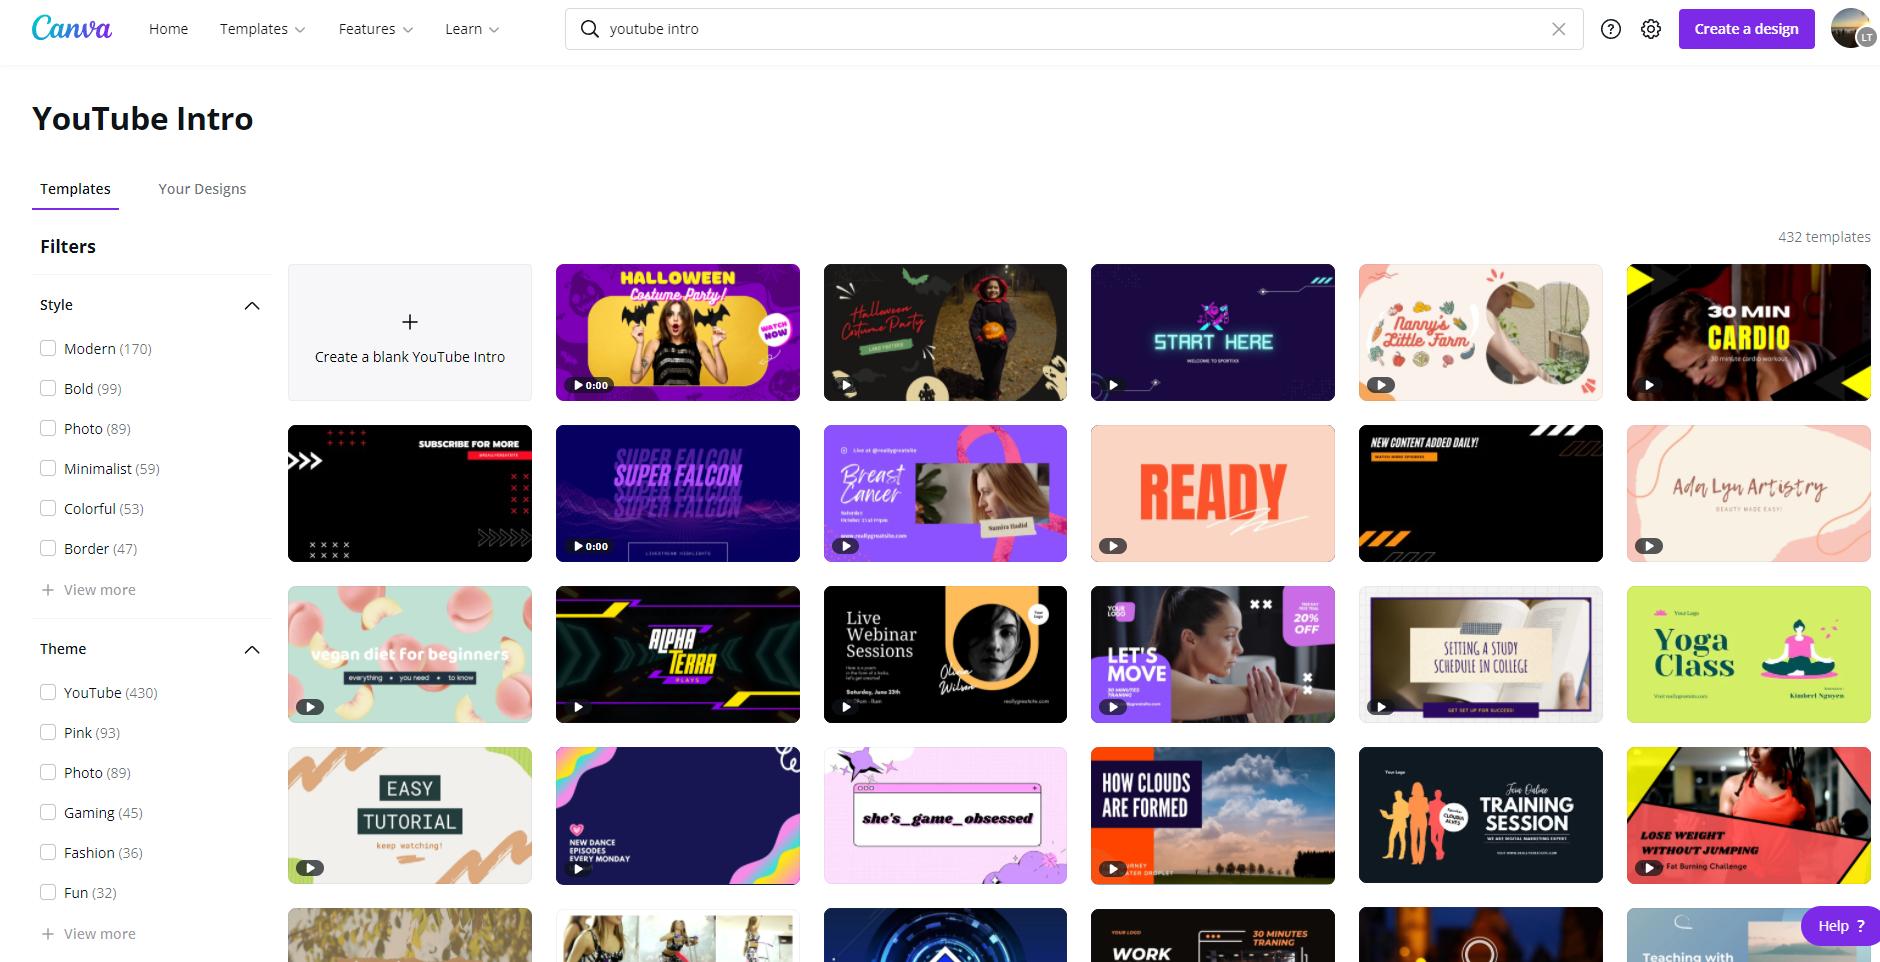 Different Youtube intro templates available in Canva